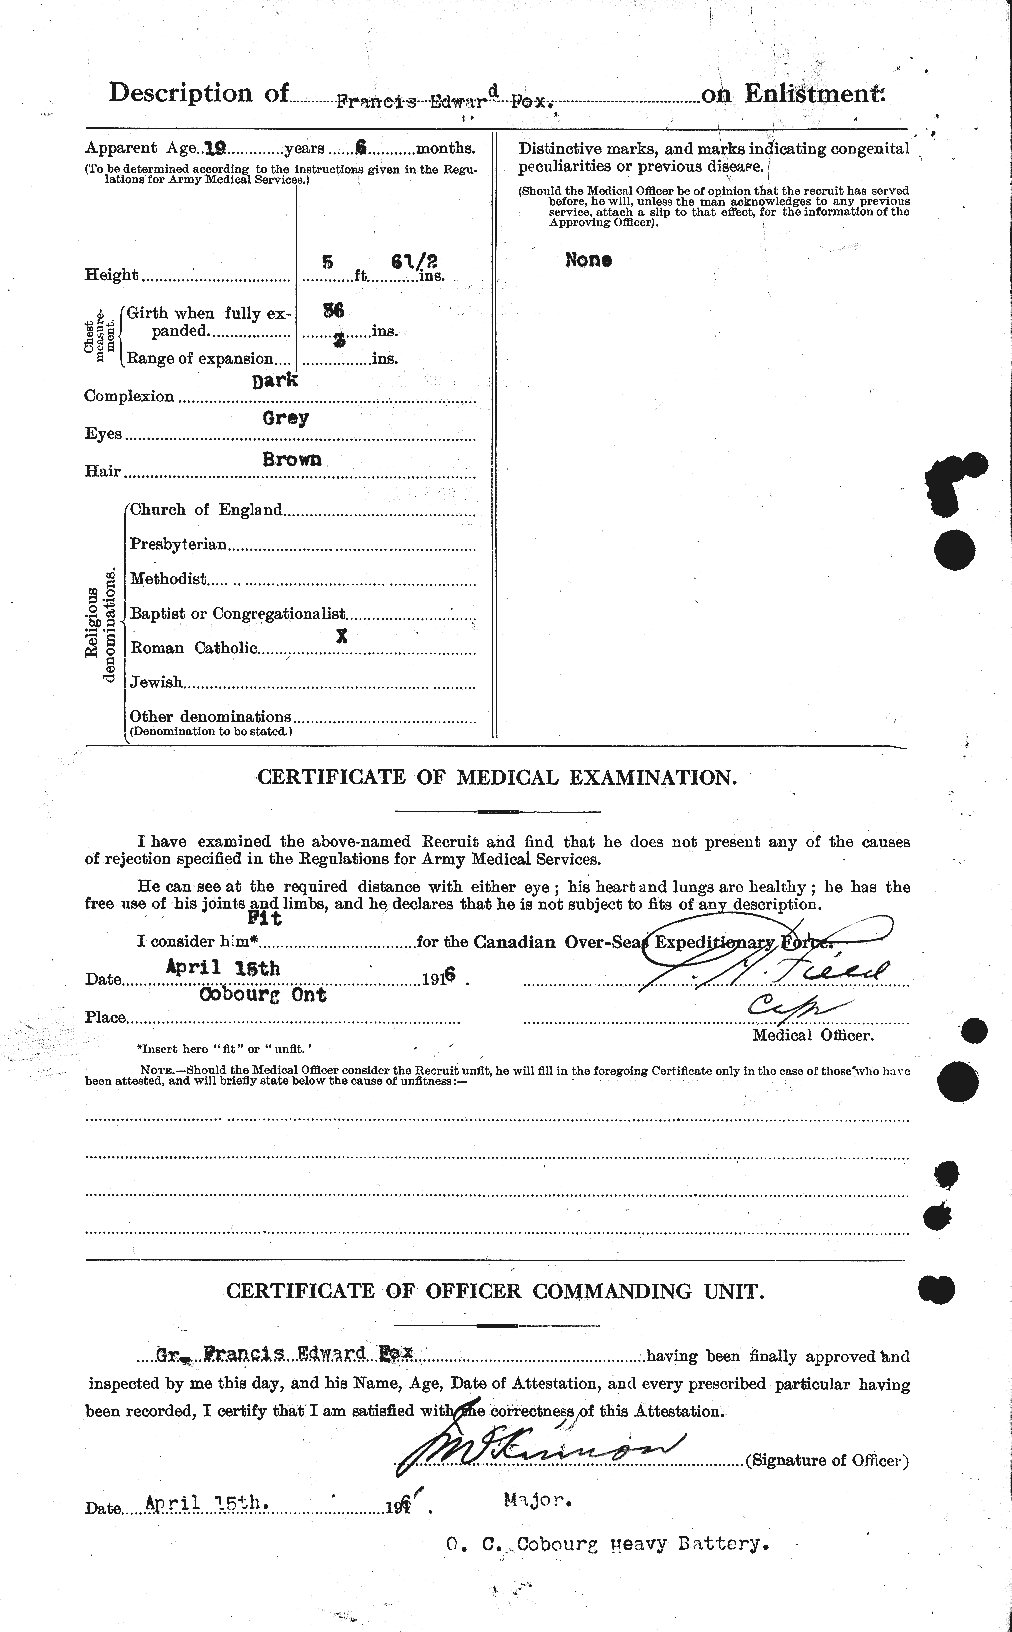 Personnel Records of the First World War - CEF 332448b